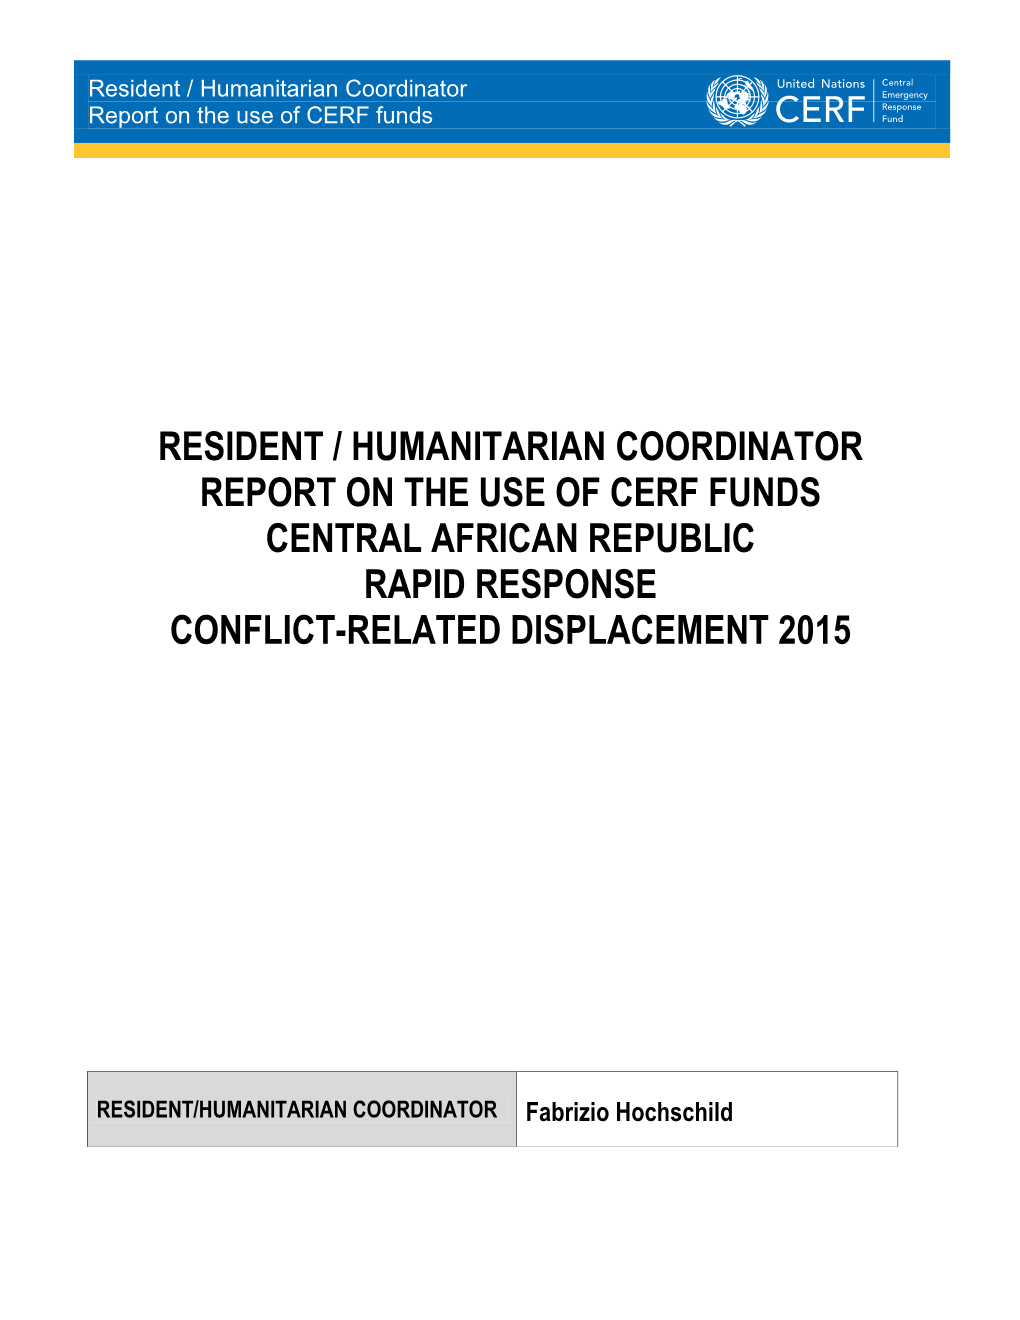 Central African Republic Rapid Response Conflict-Related Displacement 2015